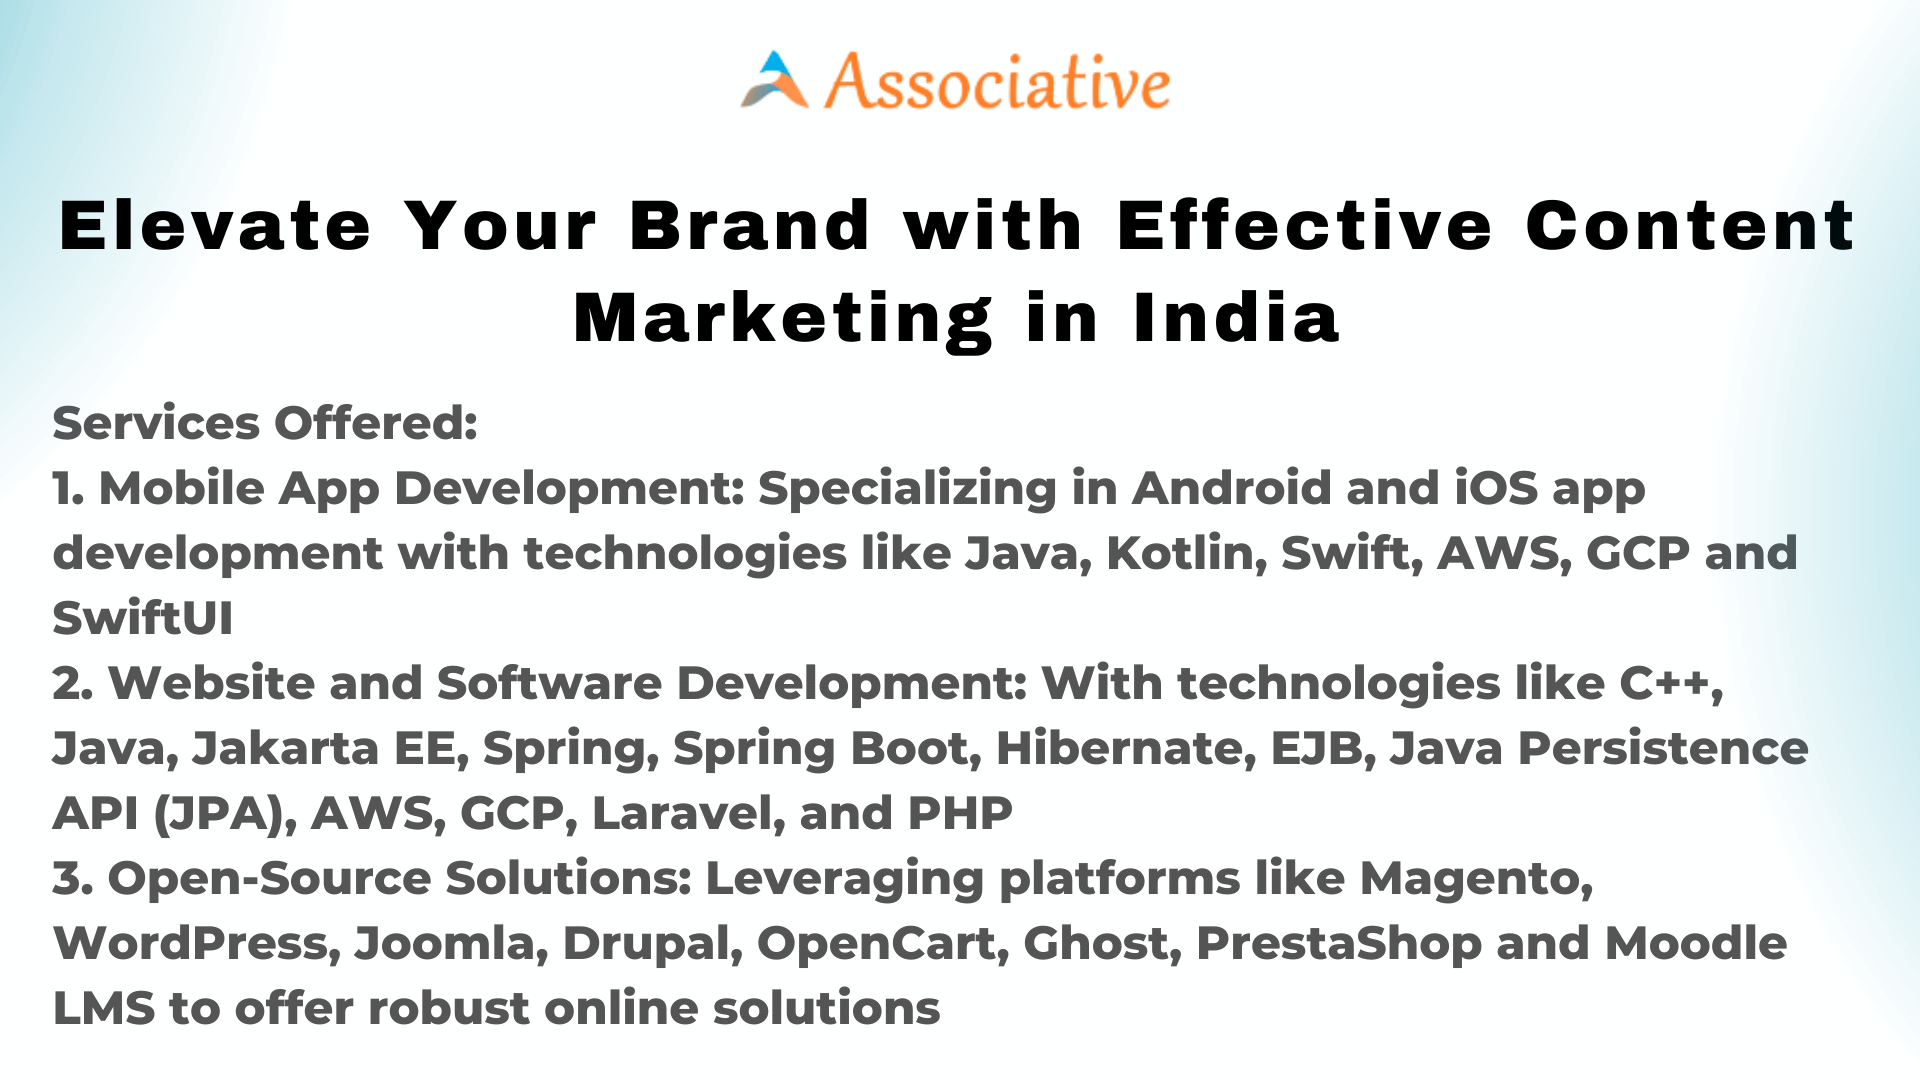 Elevate Your Brand with Effective Content Marketing in India